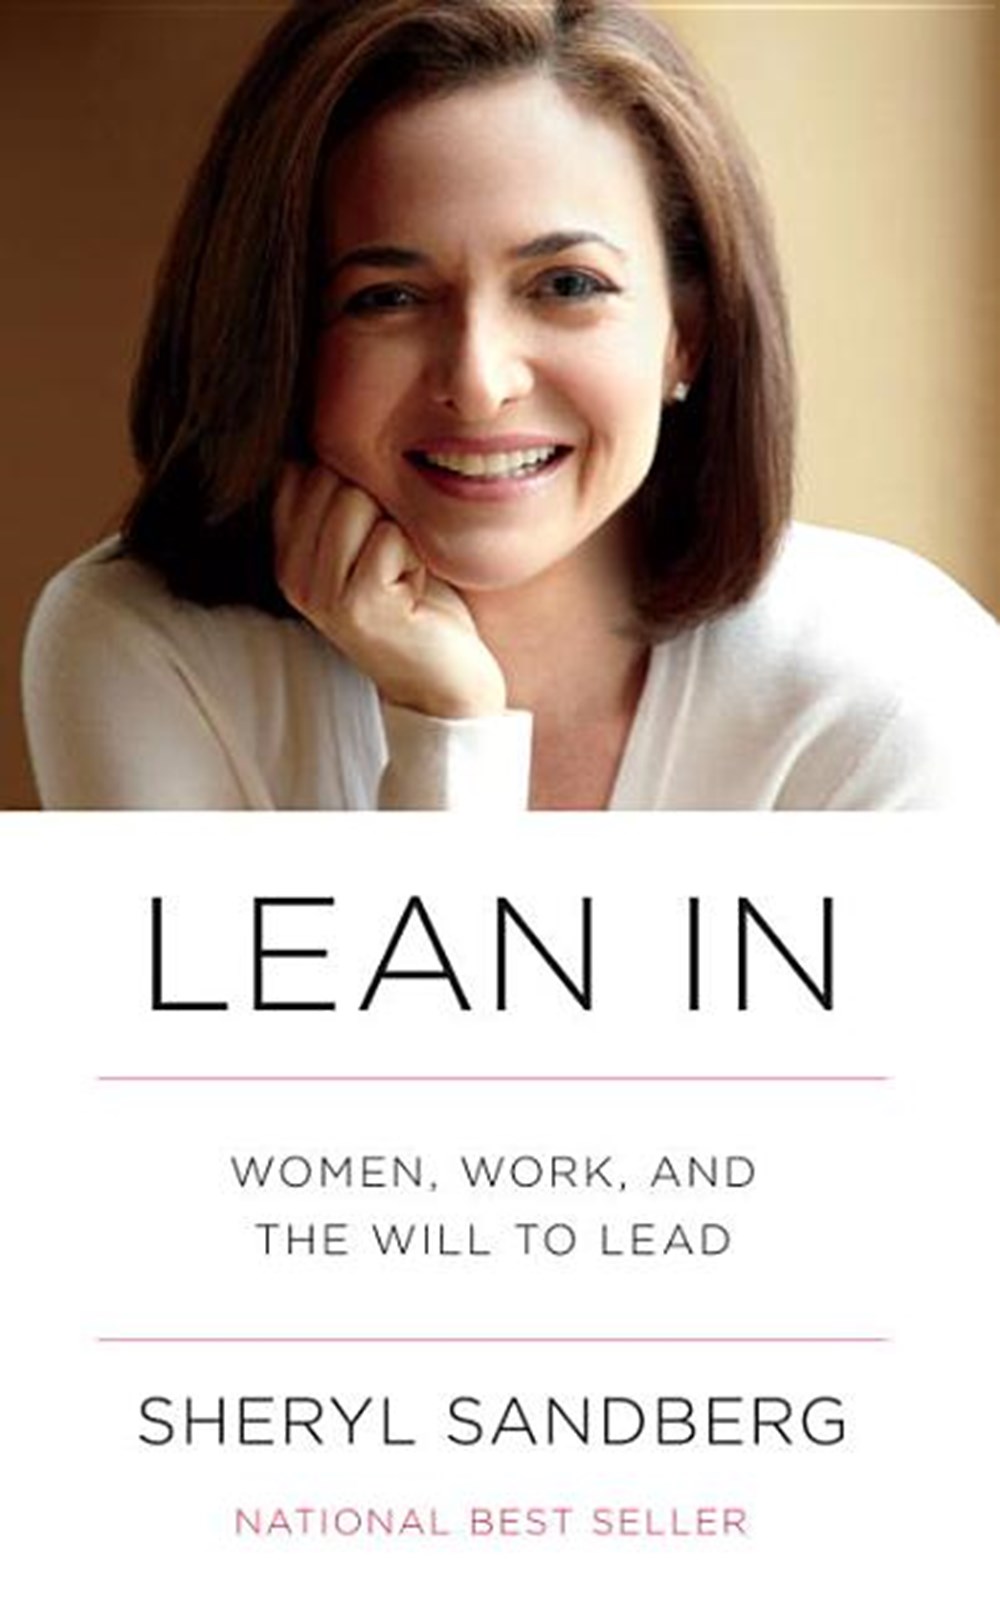 Lean in Women, Work, and the Will to Lead